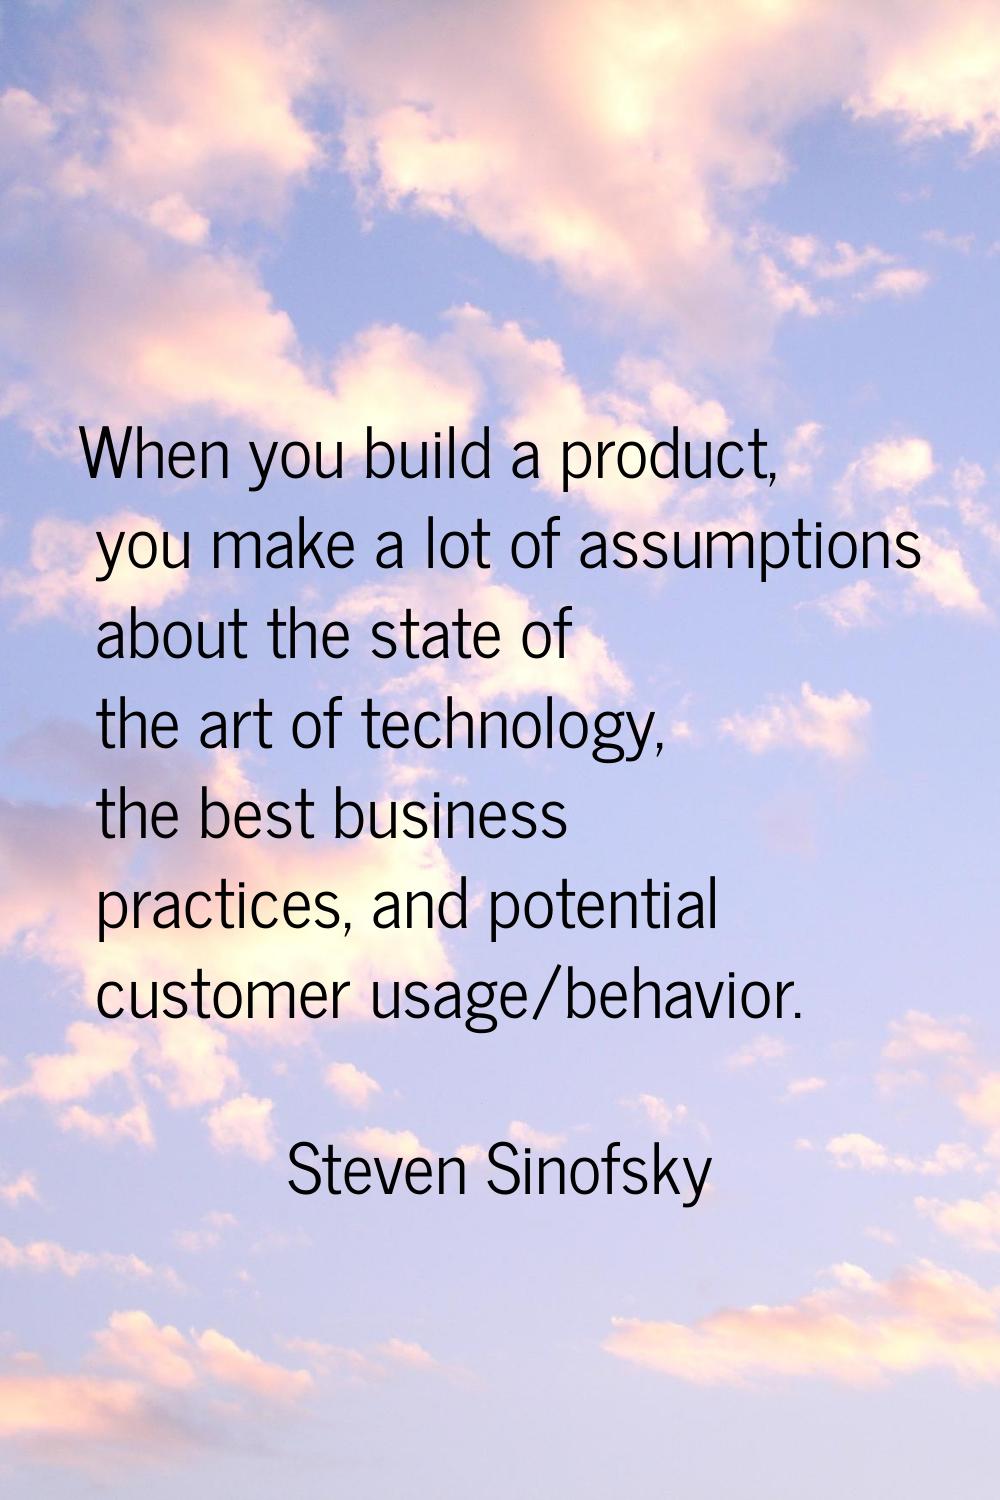 When you build a product, you make a lot of assumptions about the state of the art of technology, t